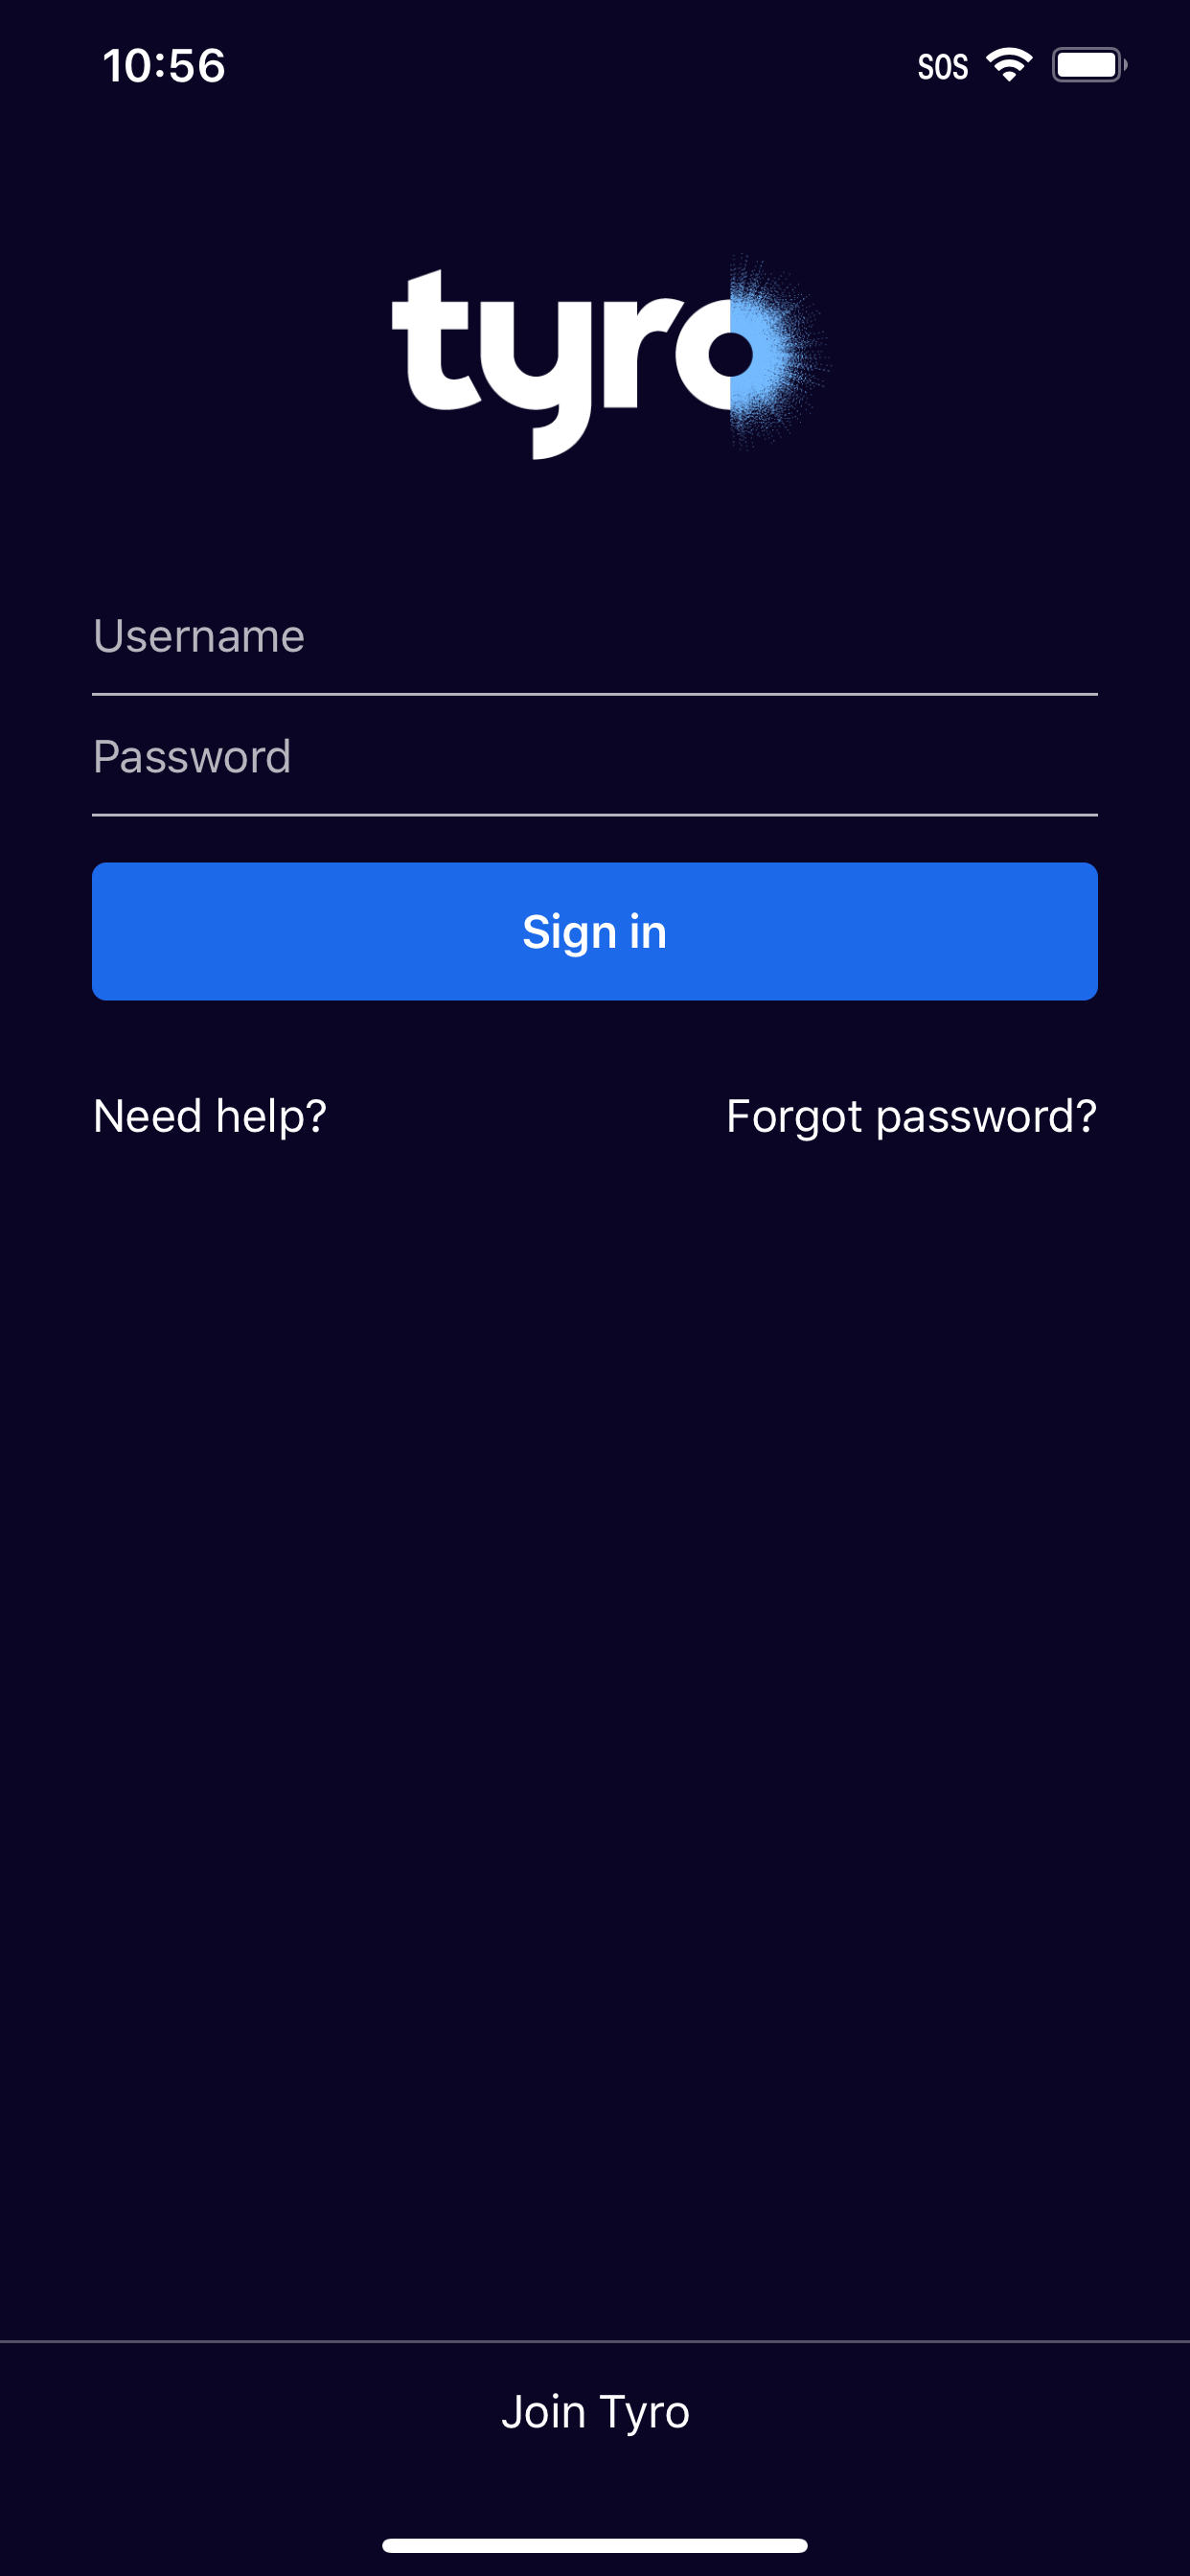 How do I log in to the Tyro App for the first time?